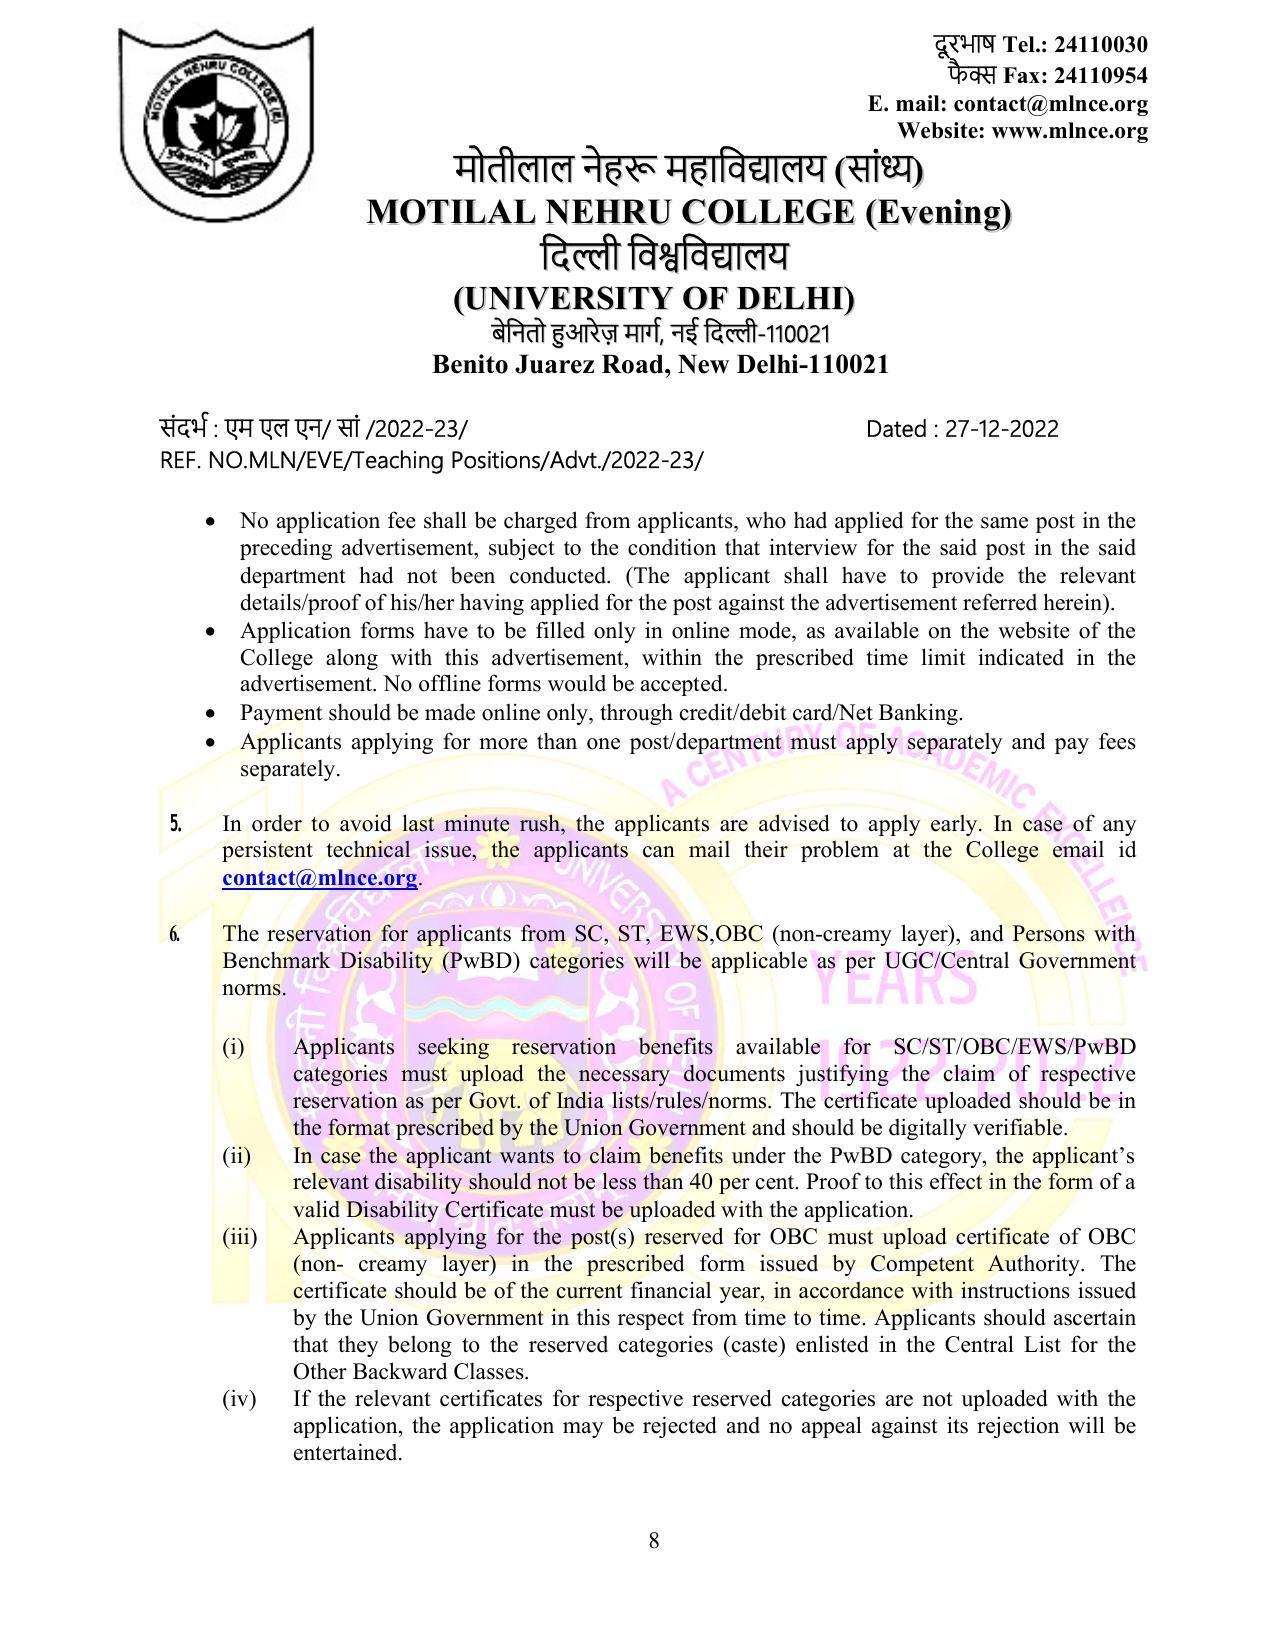 Motilal Nehru College (Evening) Invites Application for 75 Assistant Professor Recruitment 2022 - Page 12